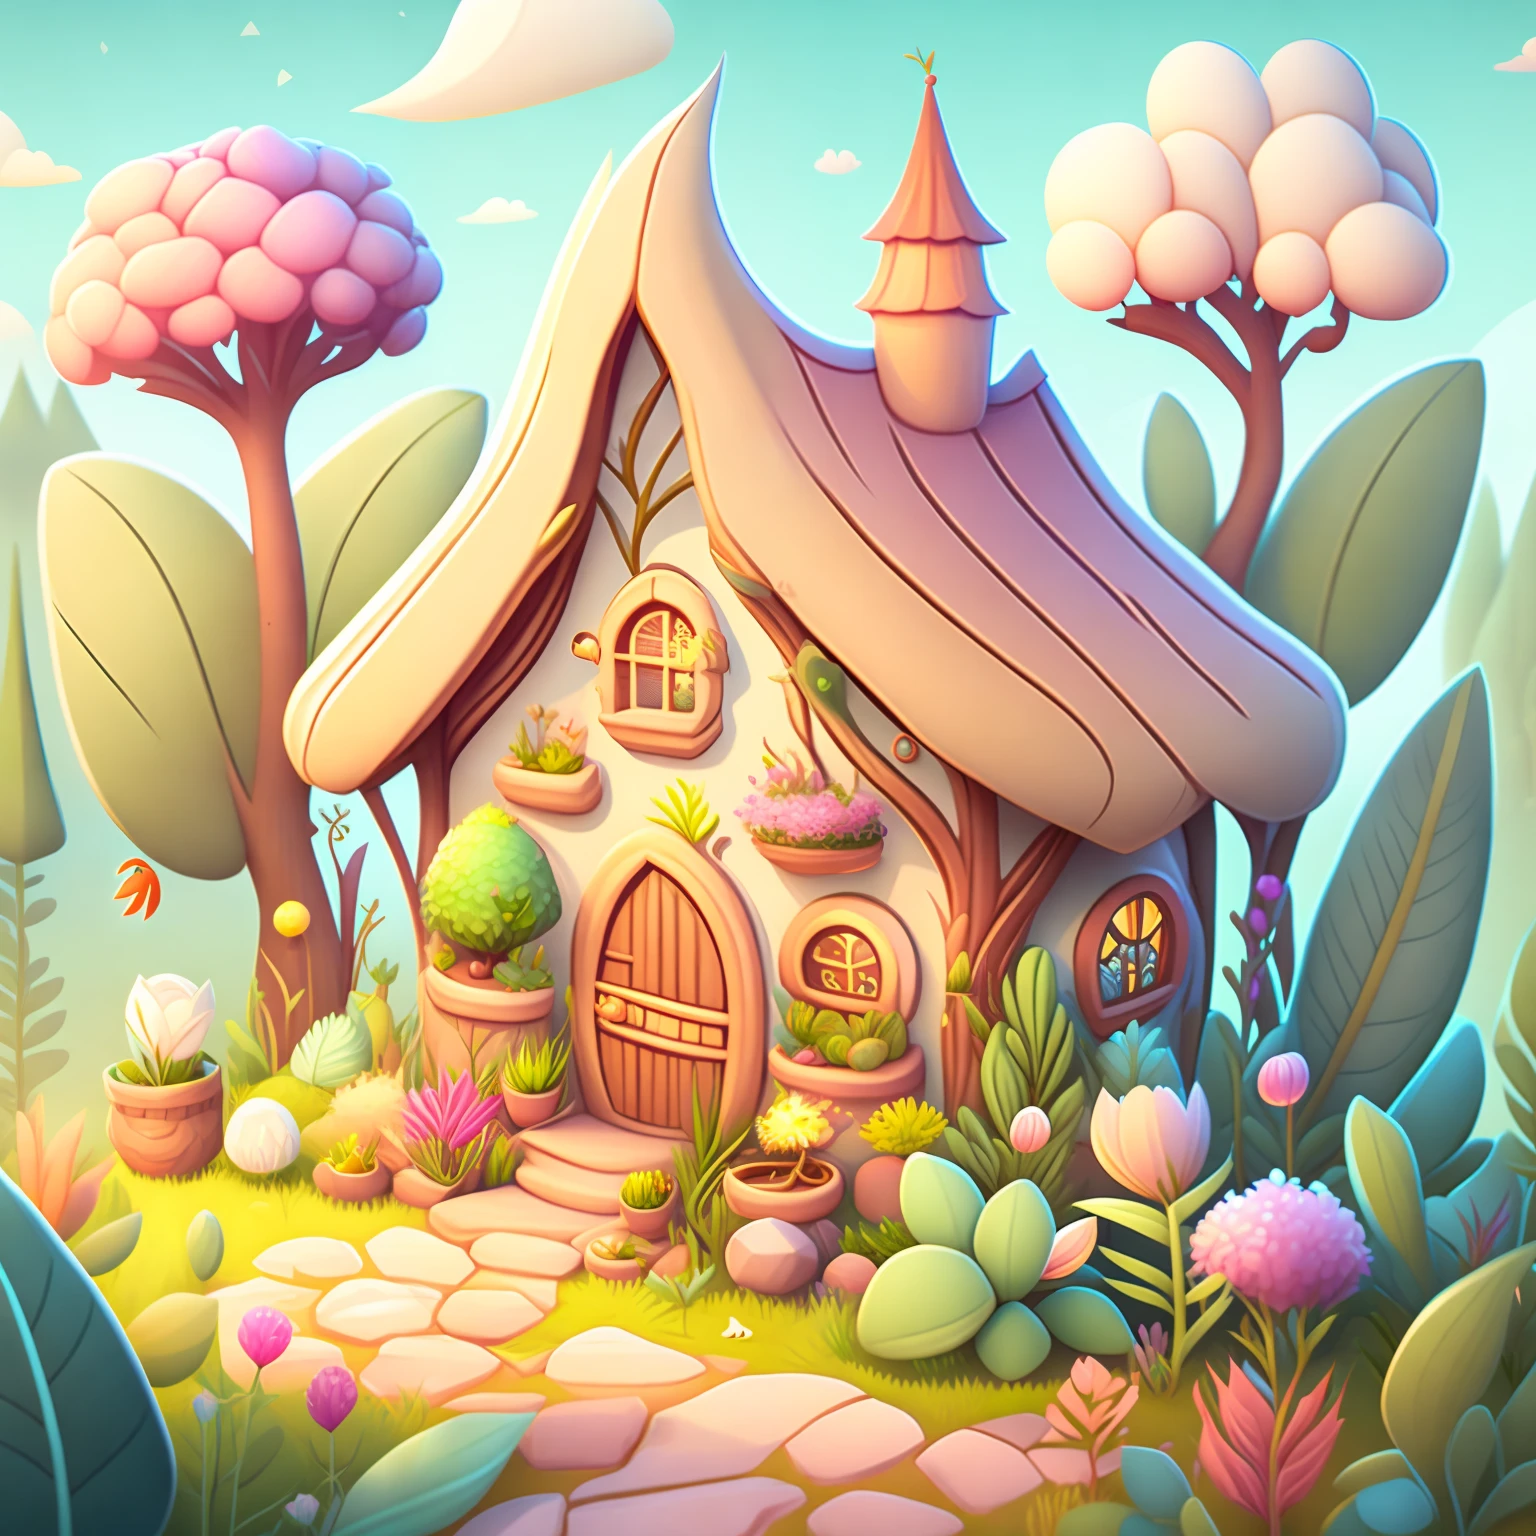 Cartoon-style house, flowers and plants, magical elements, mobile game， forest and plants, a touch of magical elements, outlines of animals.